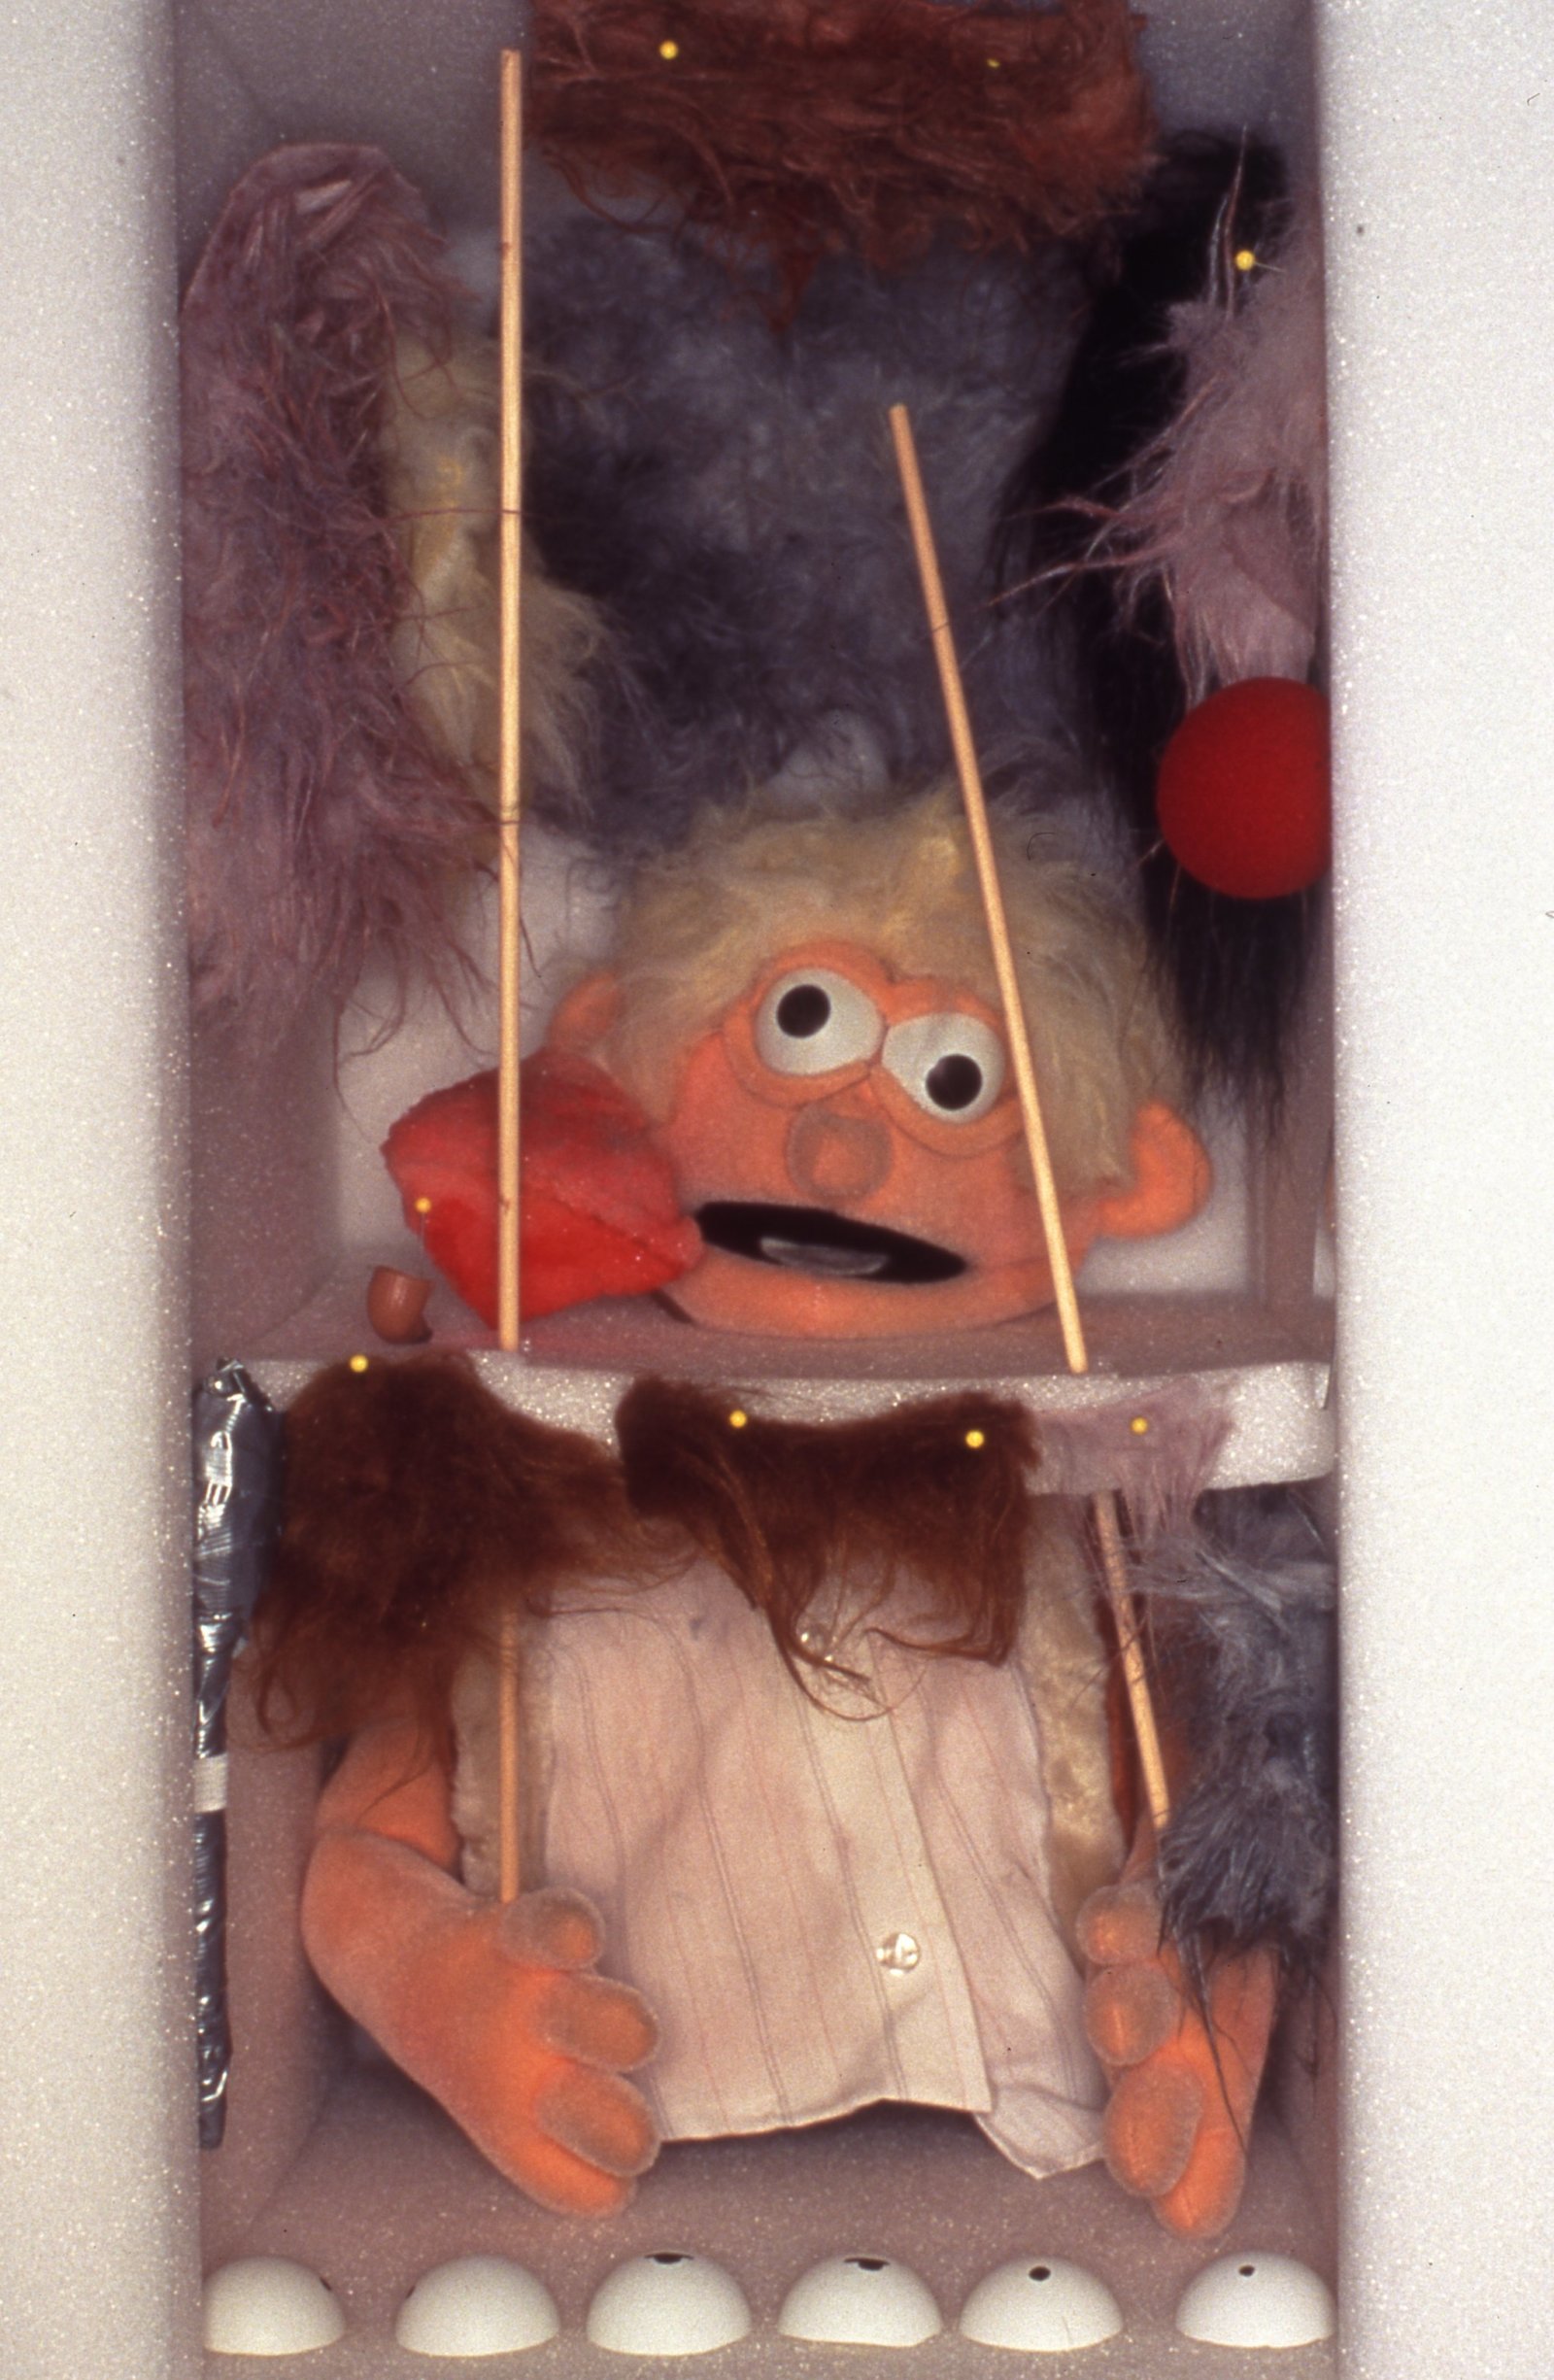 Geoffrey Farmer, Puppet Kit (Personality Workshop) (detail), 2001, crate, various media and video, dimensions variable